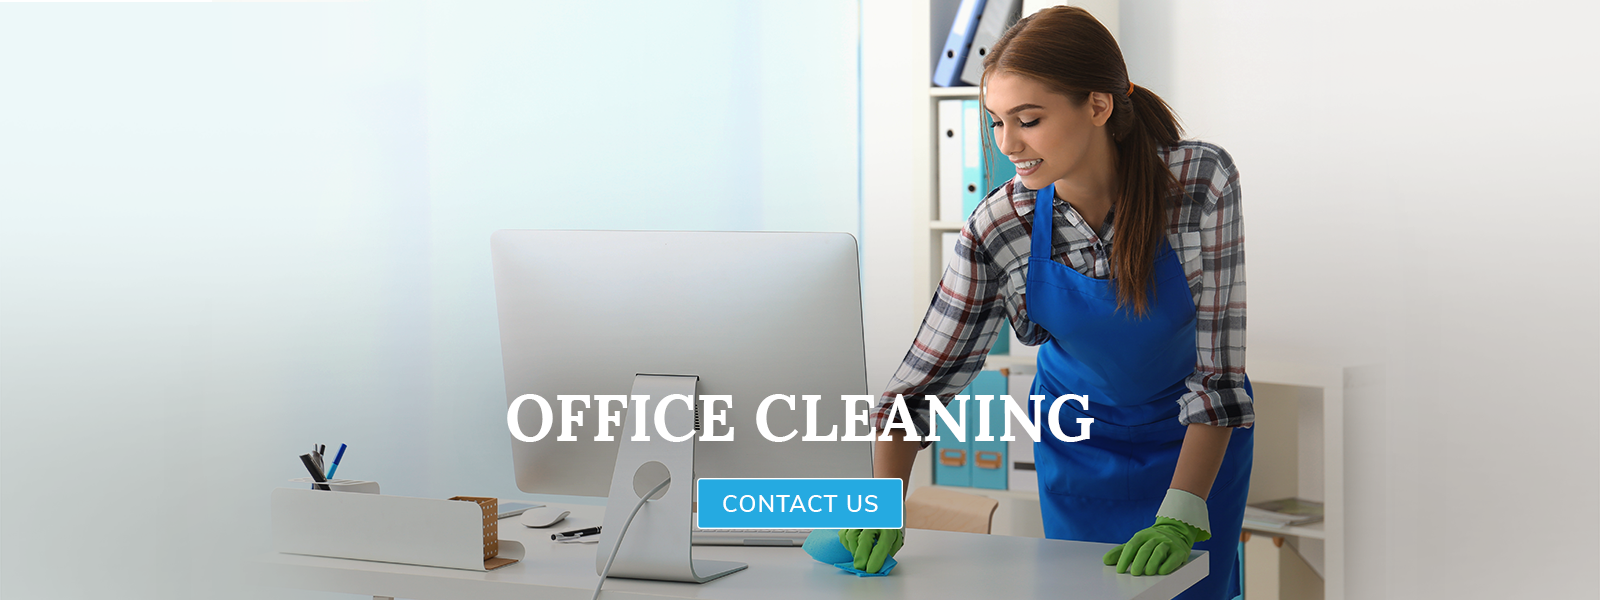 Cleaning Services Windsor Ontario